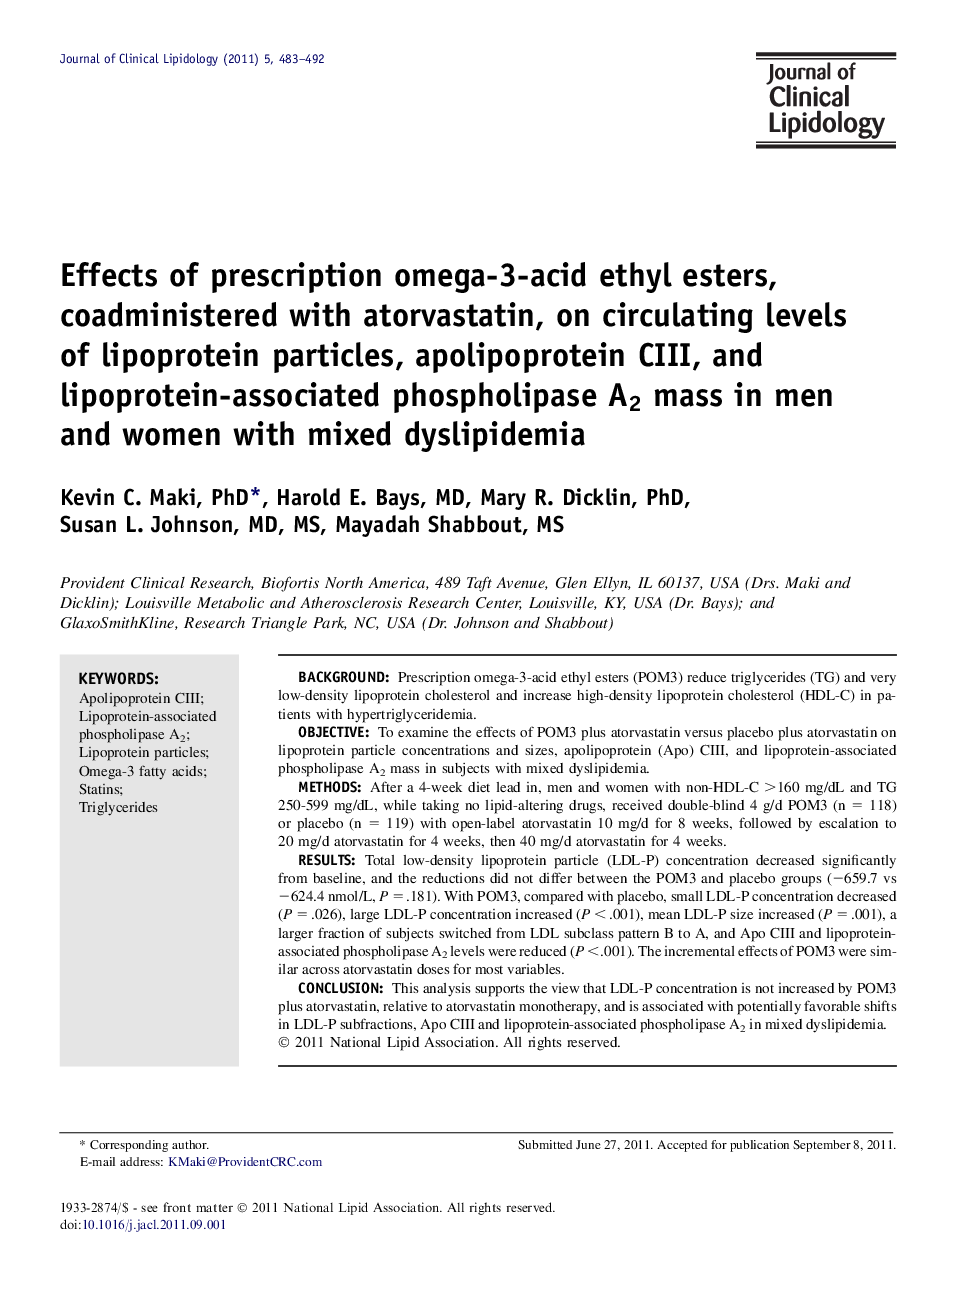 Effects of prescription omega-3-acid ethyl esters, coadministered with atorvastatin, on circulating levels of lipoprotein particles, apolipoprotein CIII, and lipoprotein-associated phospholipase A2 mass in men and women with mixed dyslipidemia